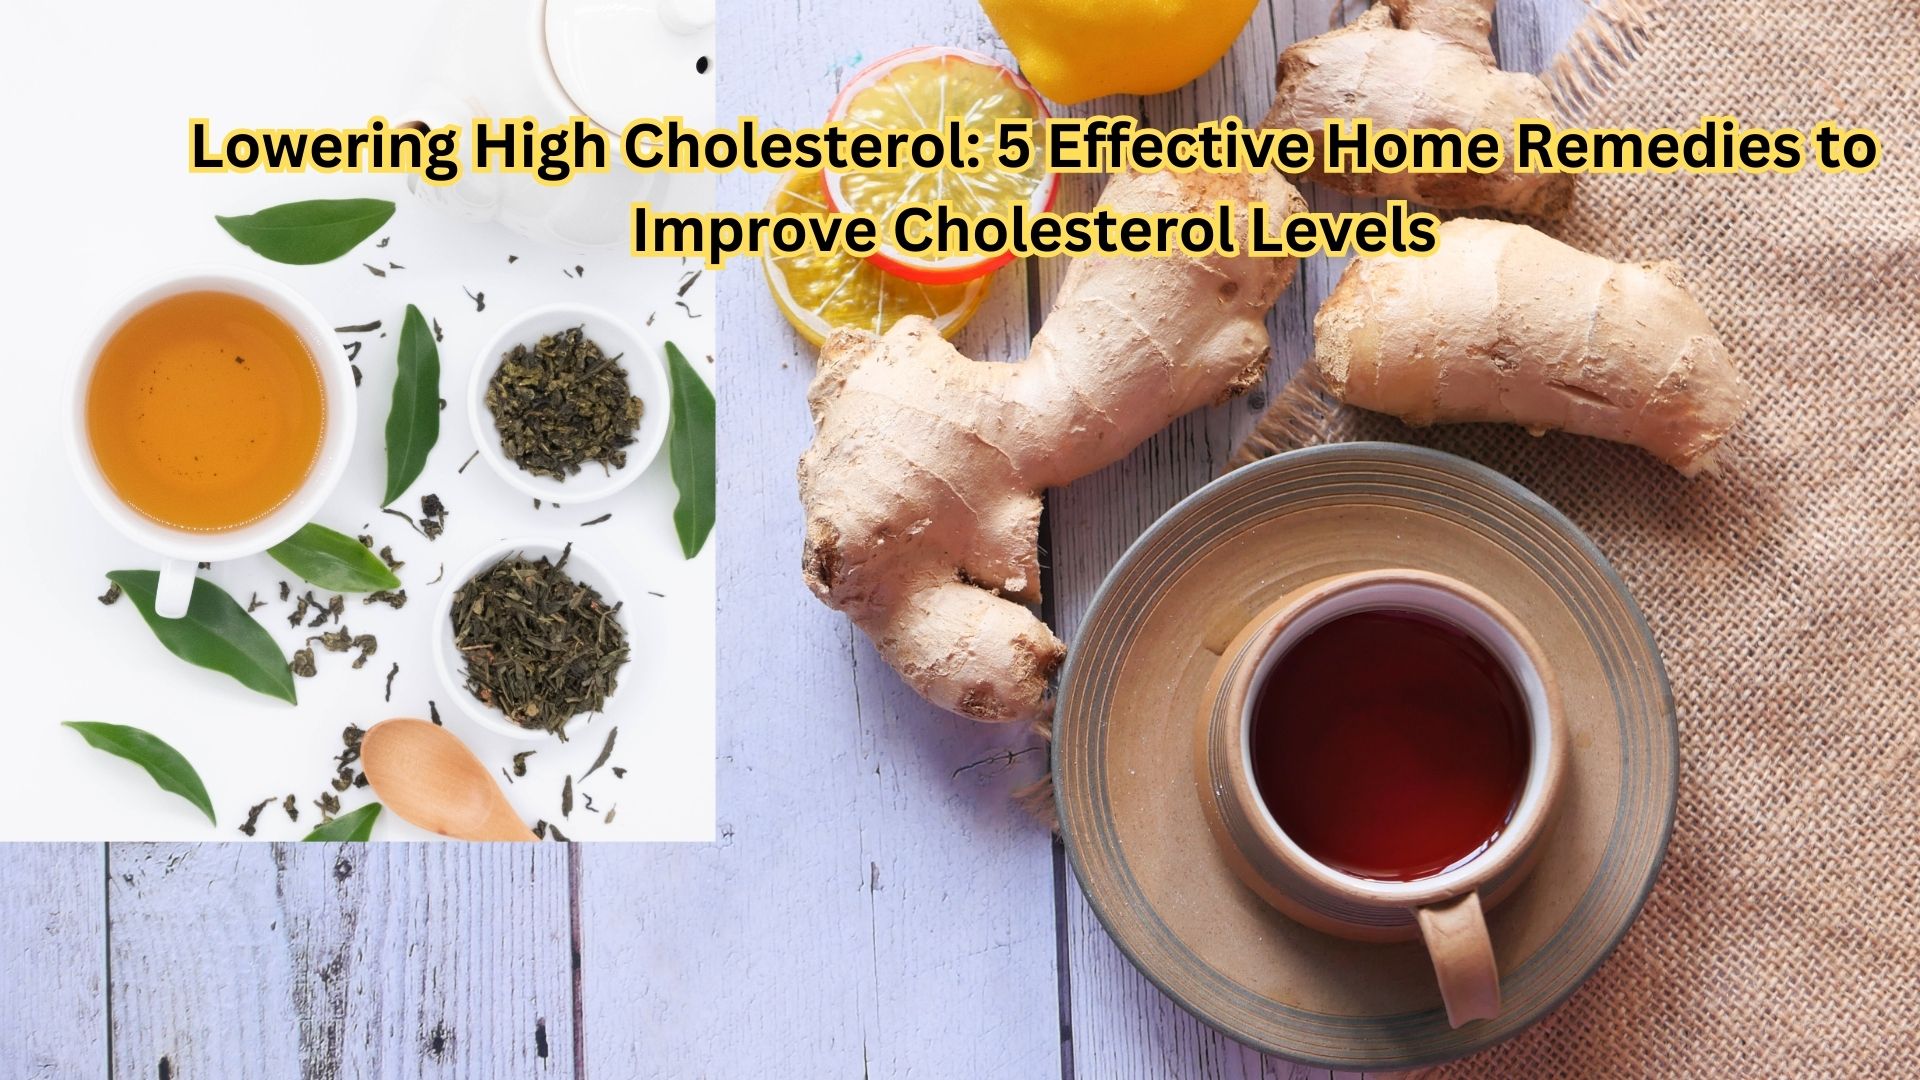 Lowering High Cholesterol: 5 Effective Home Remedies to Improve Cholesterol Levels